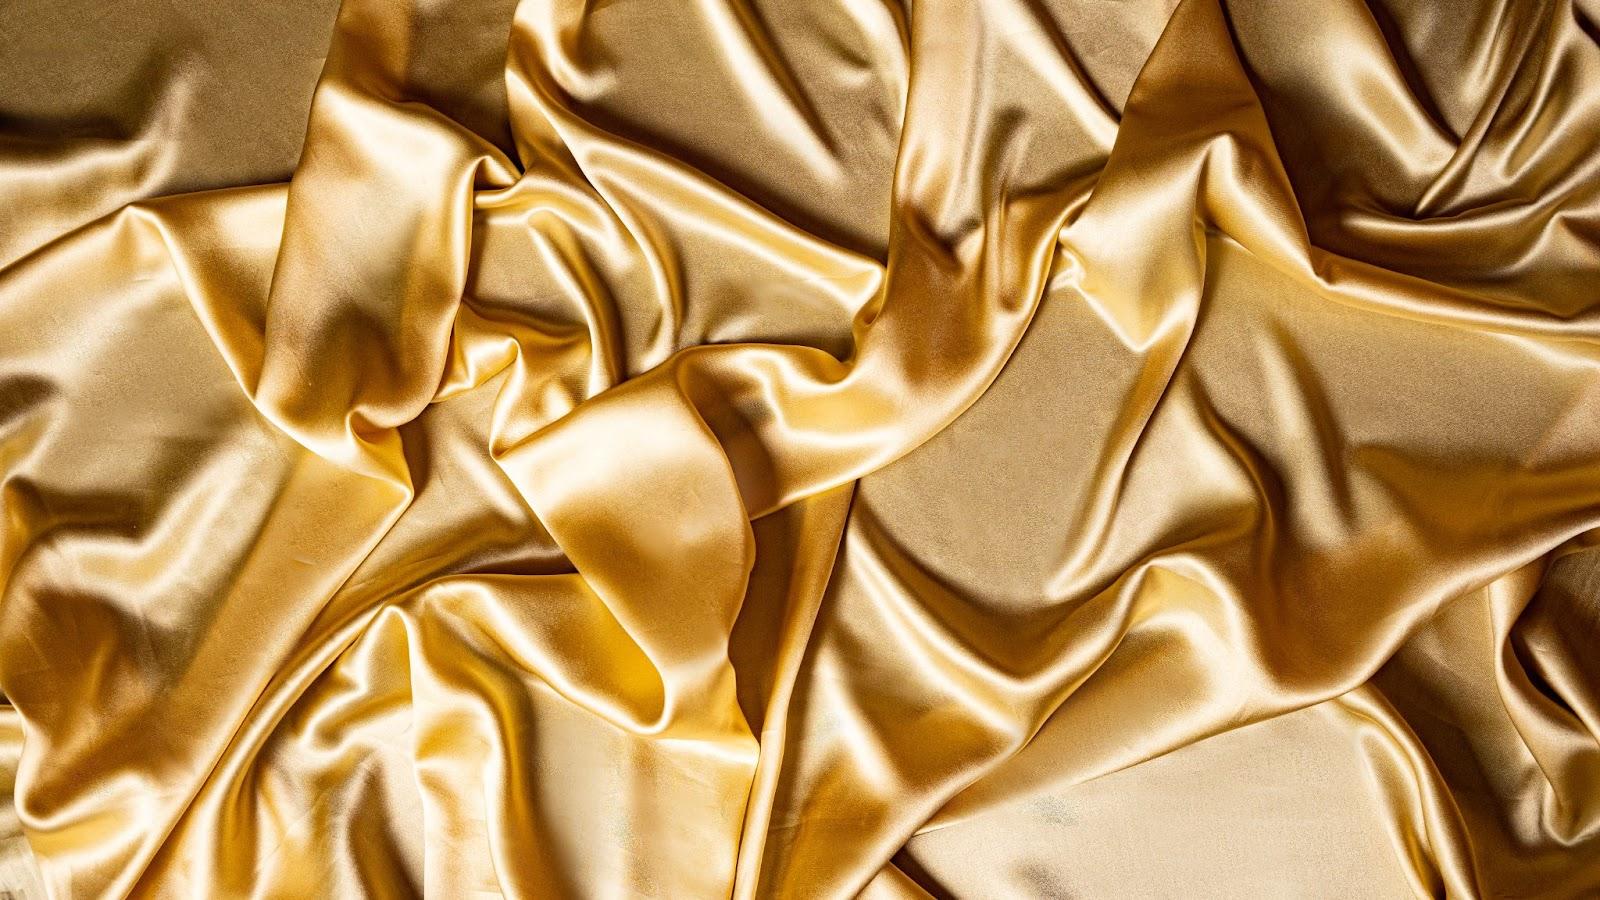 If you beach satin fabrics properly, it will give you a new look.